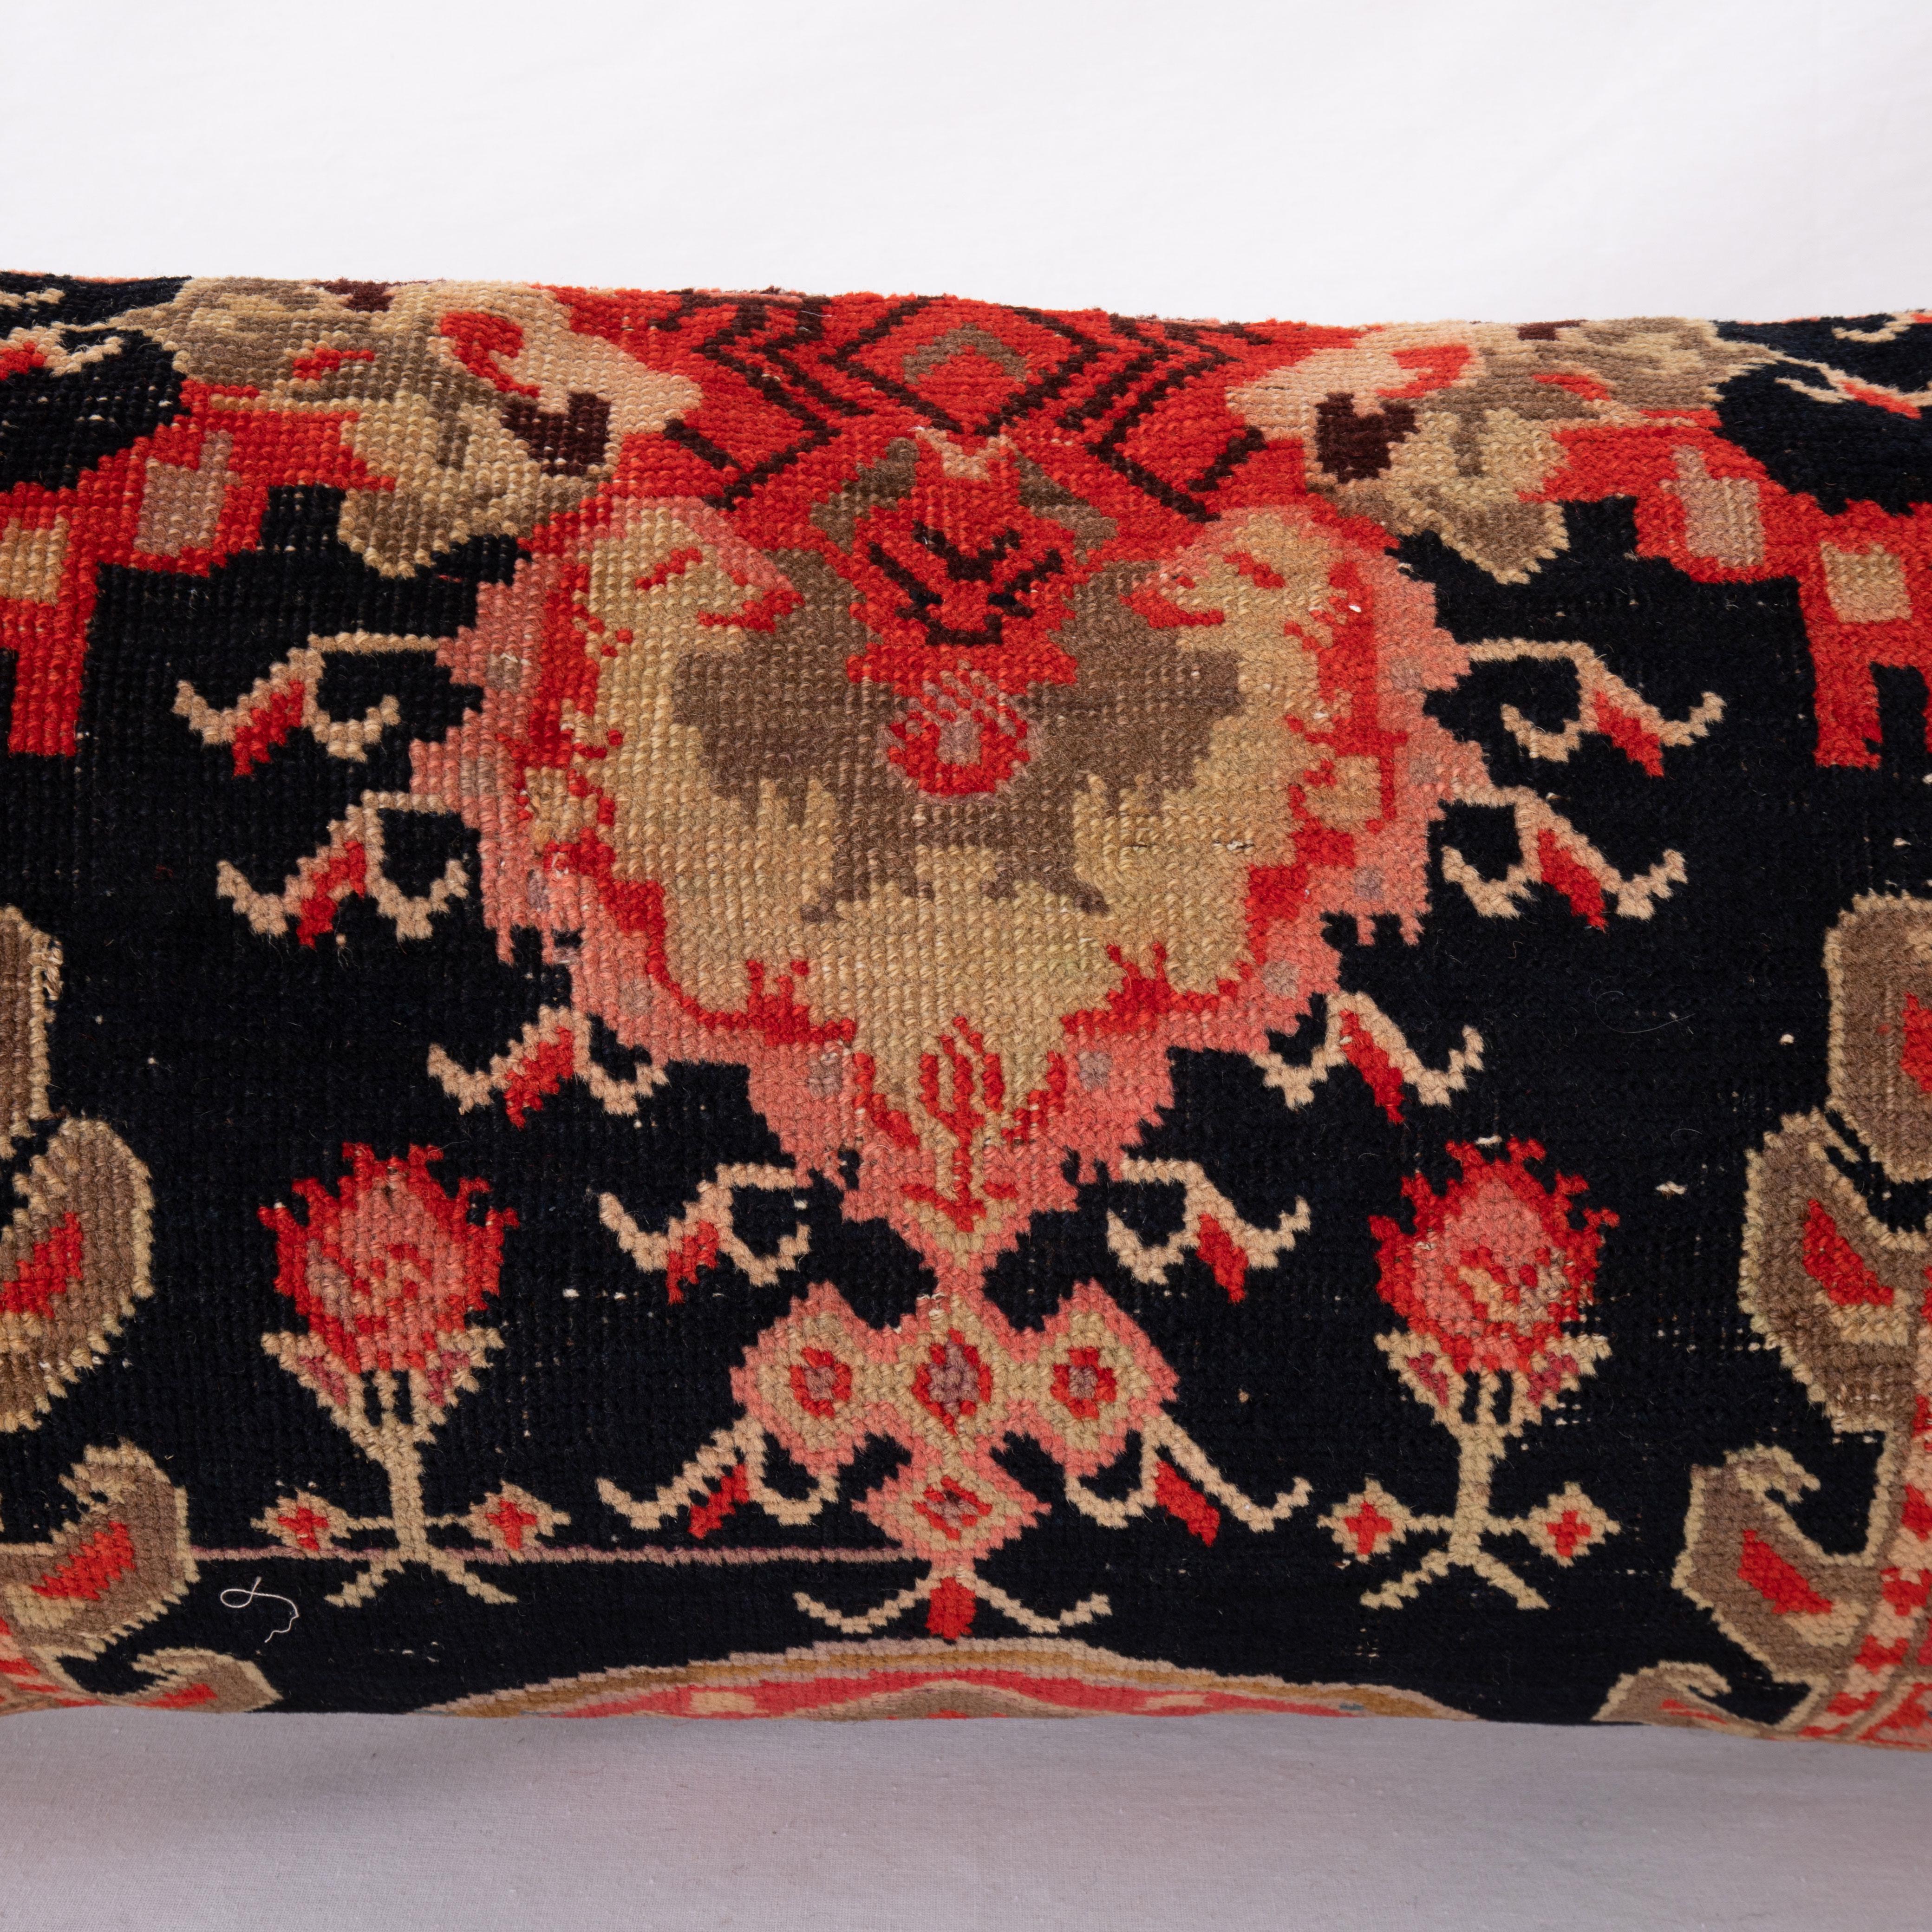 Hand-Woven Pillow Cover Made from an Antique Caucasian Karabagkh Rug Fragment